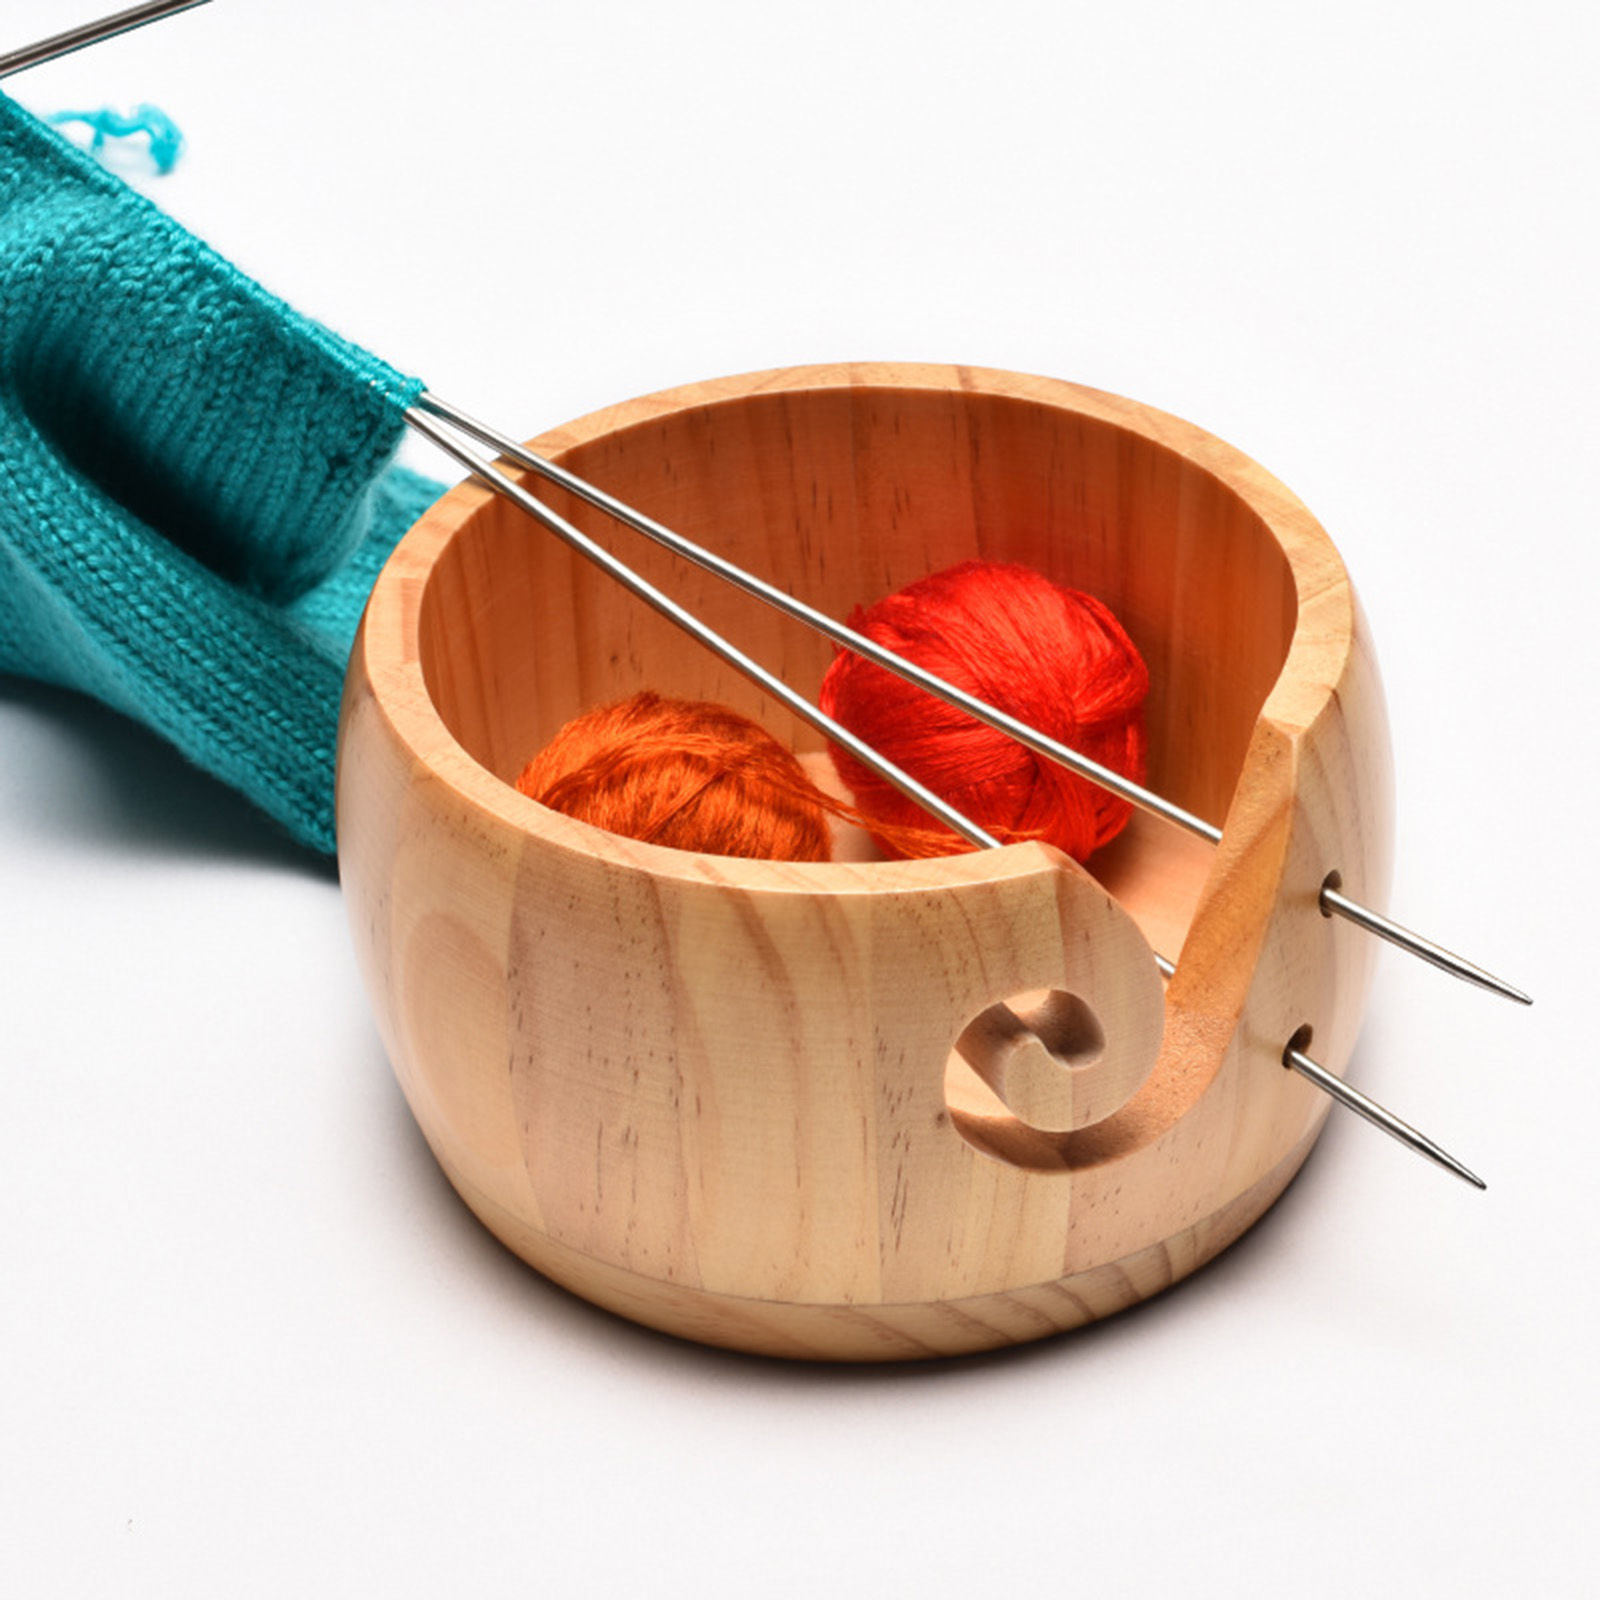 Picture of Wood Yarn Bowl Knitting Crochet Wool Storage Holder Organizer Tool Multicolor